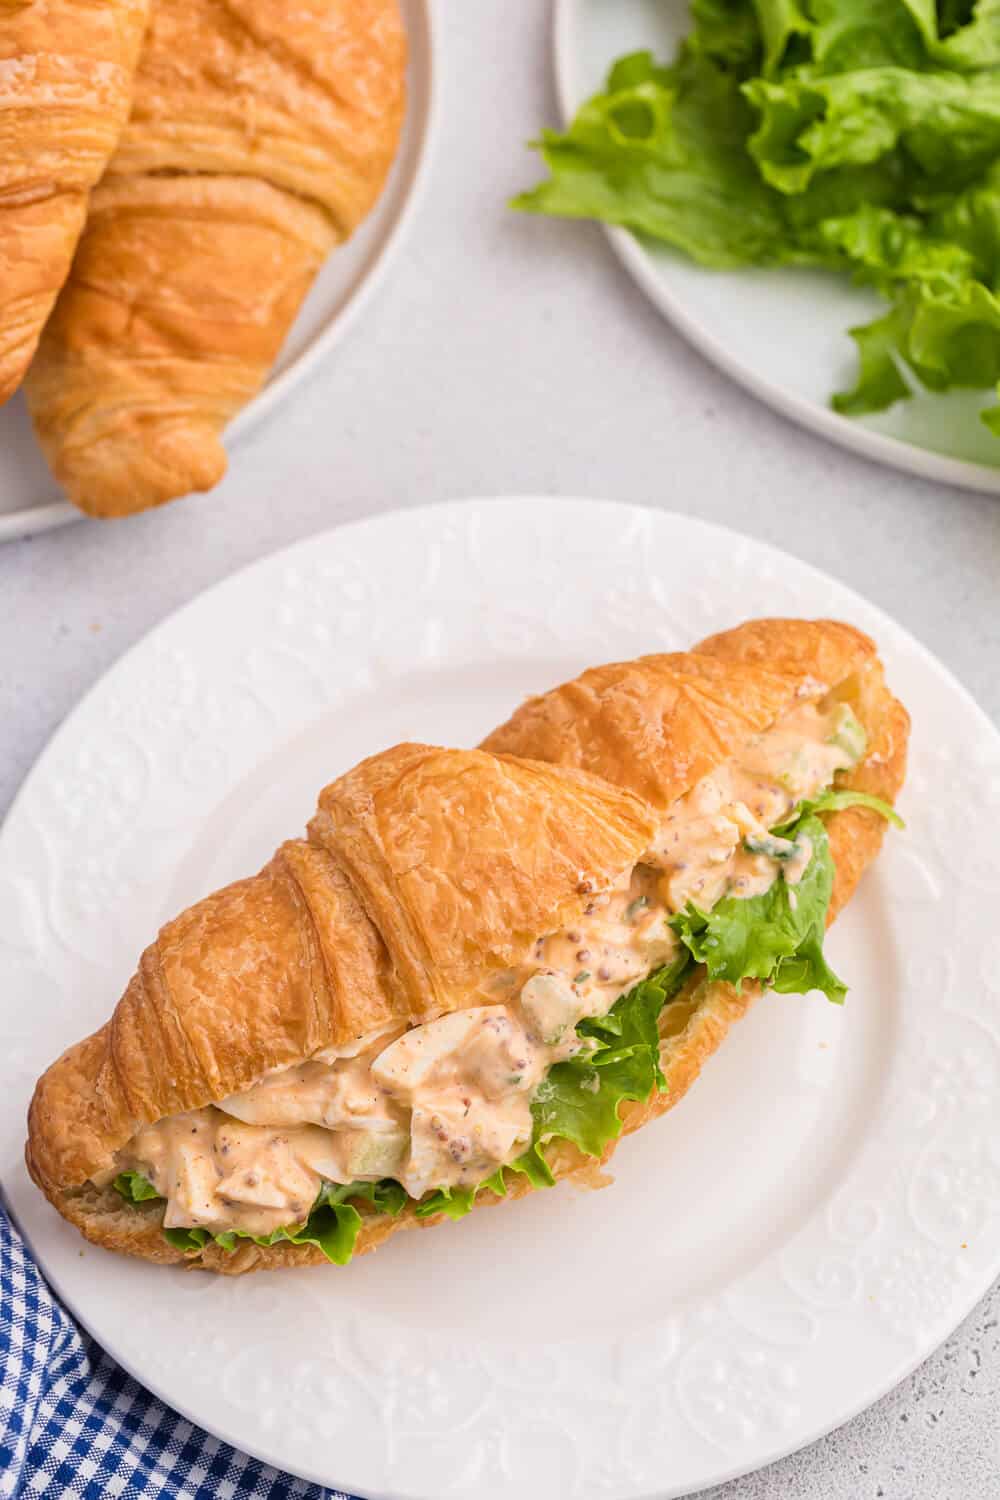 Egg salad served on a croissant with lettuce.